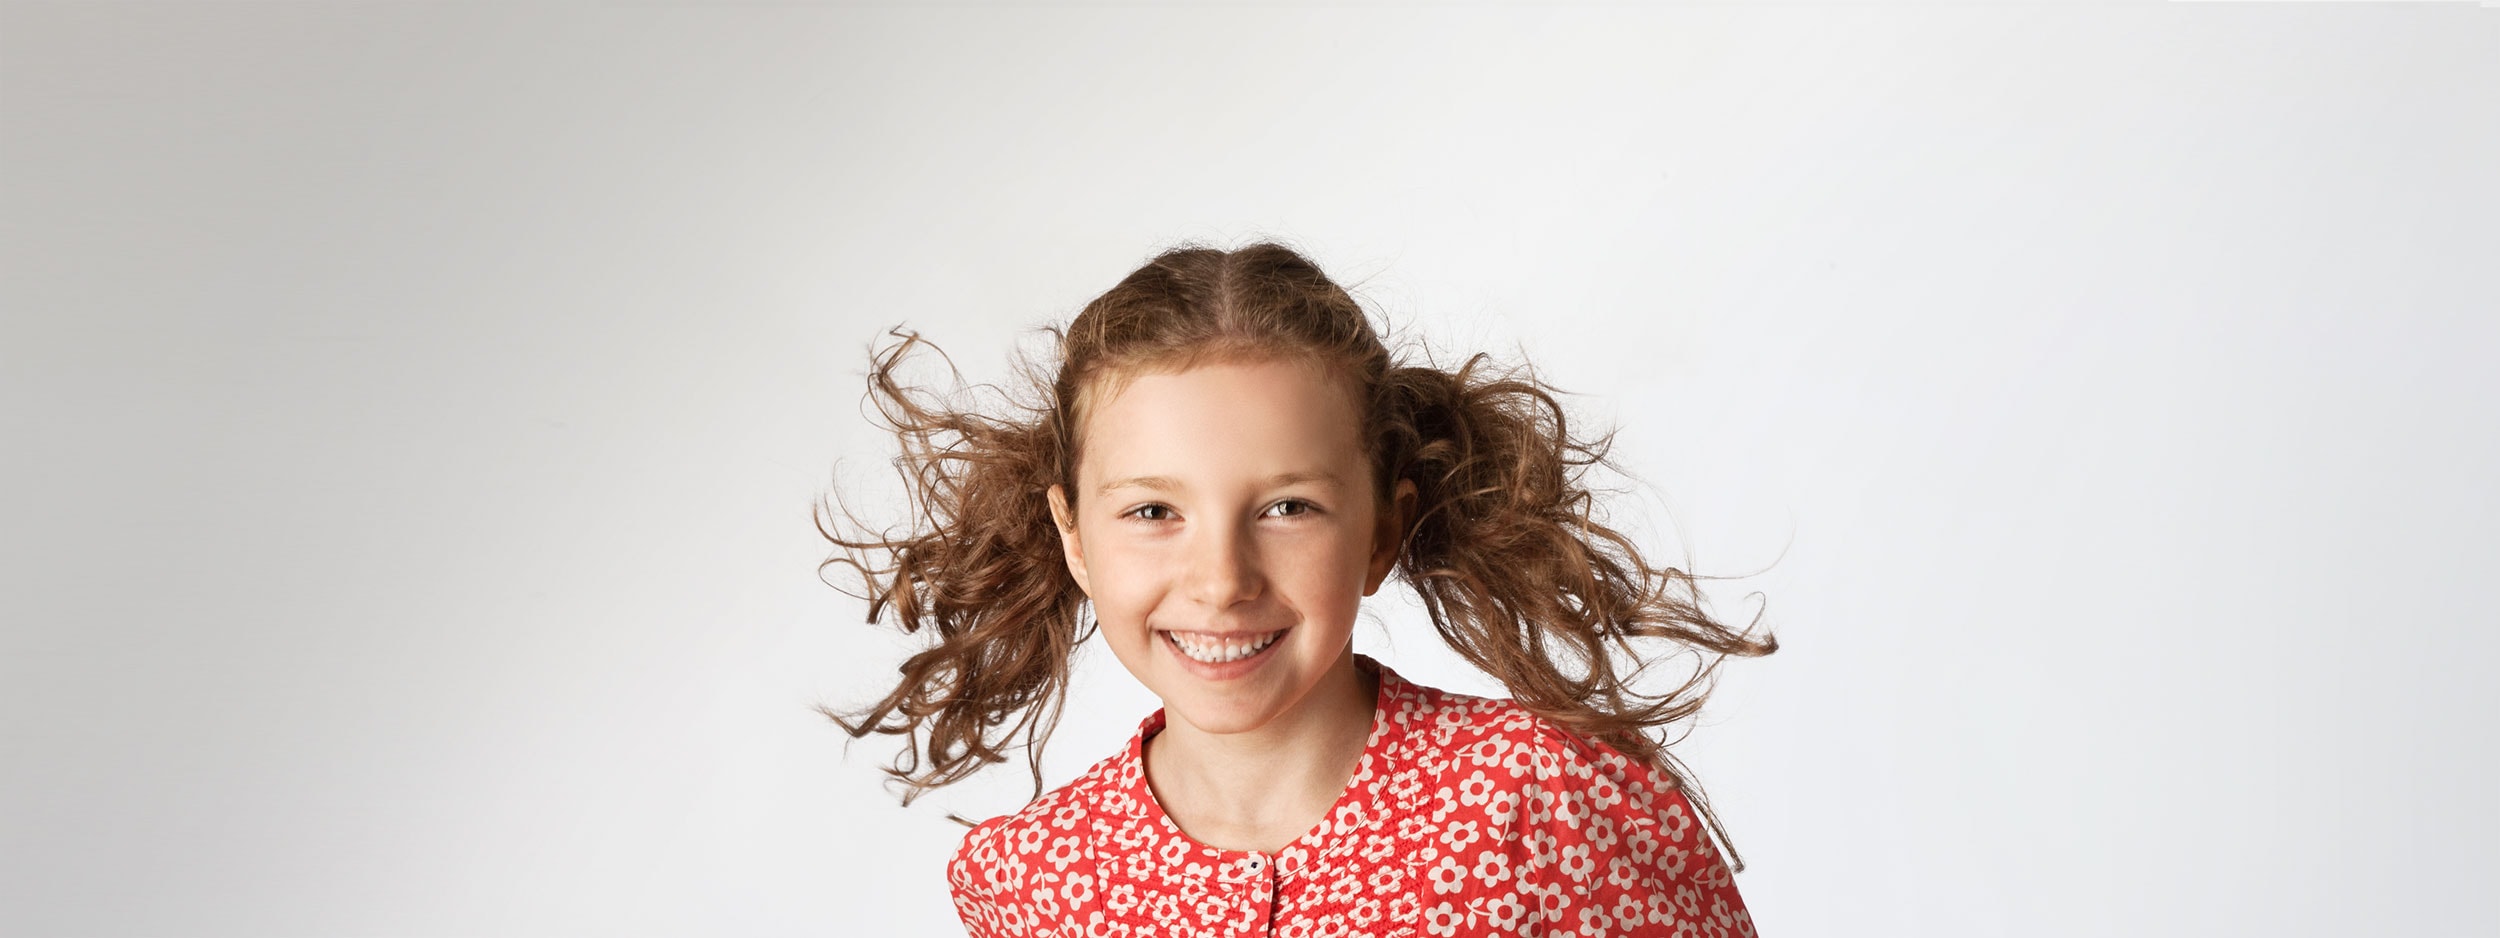 Girl with pigtails smiling